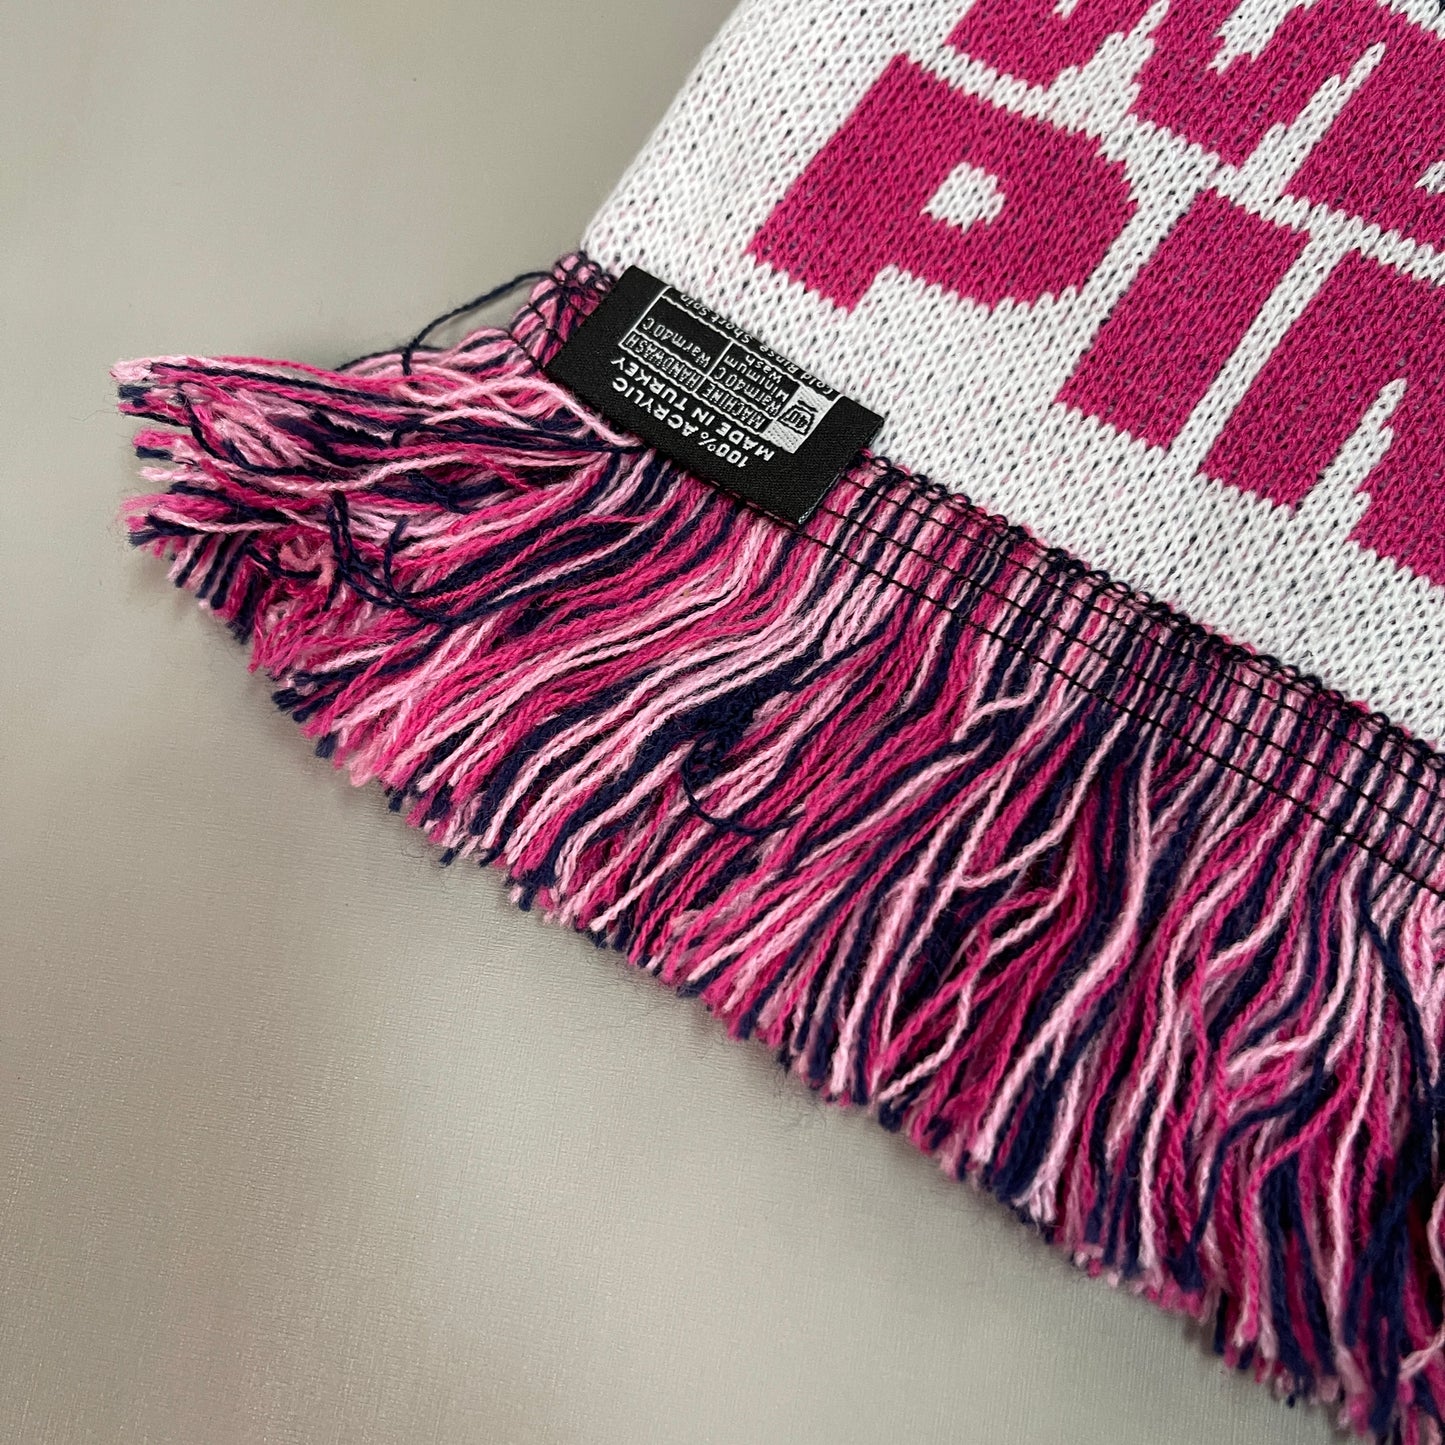 USL Real Men Wear Pink Indy Eleven Indiana Ruffneck Scarf Pink Ribbon Cancer Awareness (NEW)